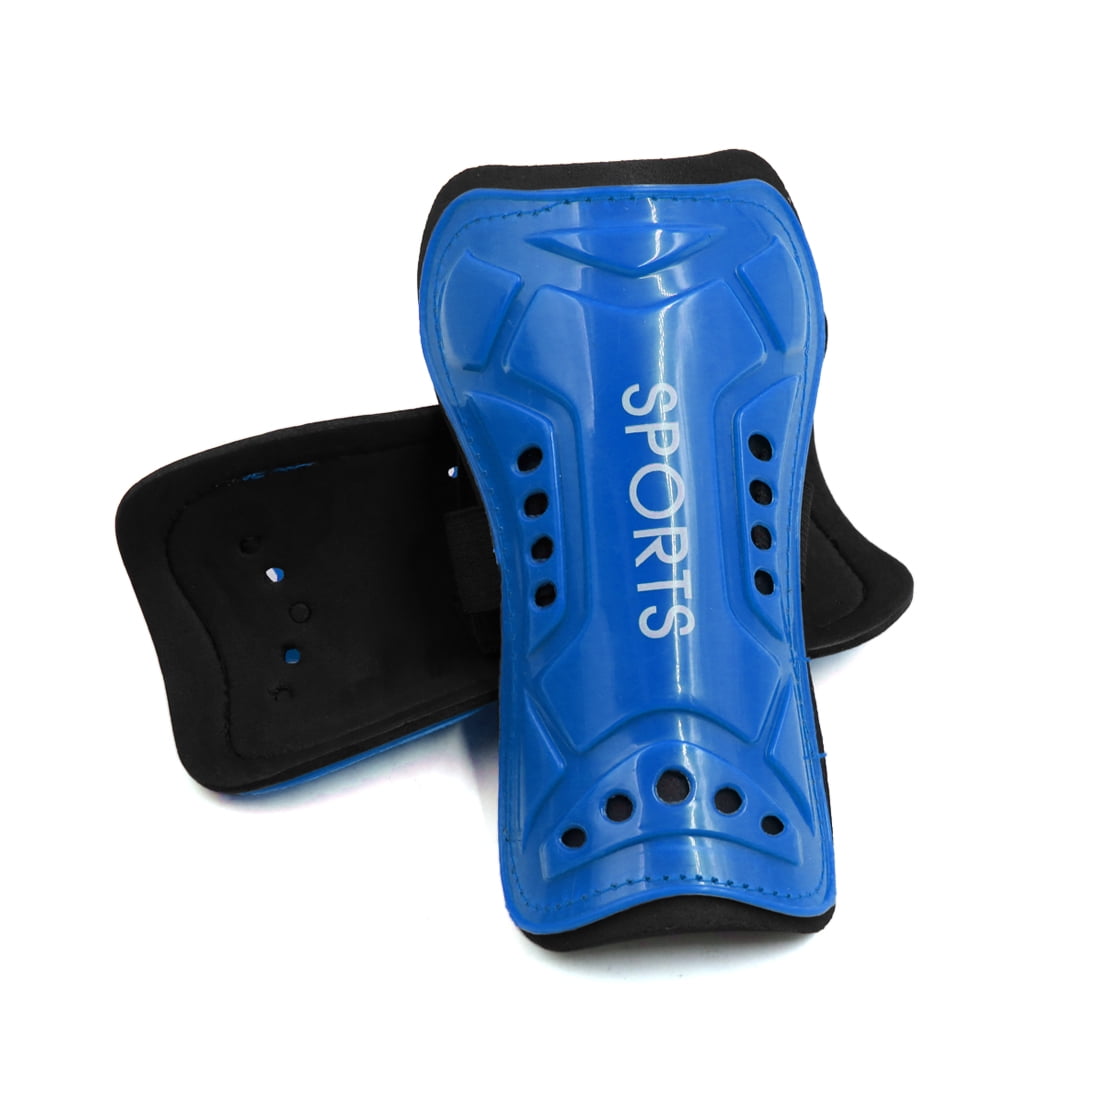 Details about   Pro 360 calf protect shinguard-peewee-blue/black-fit 3'11 to 4'6 height 